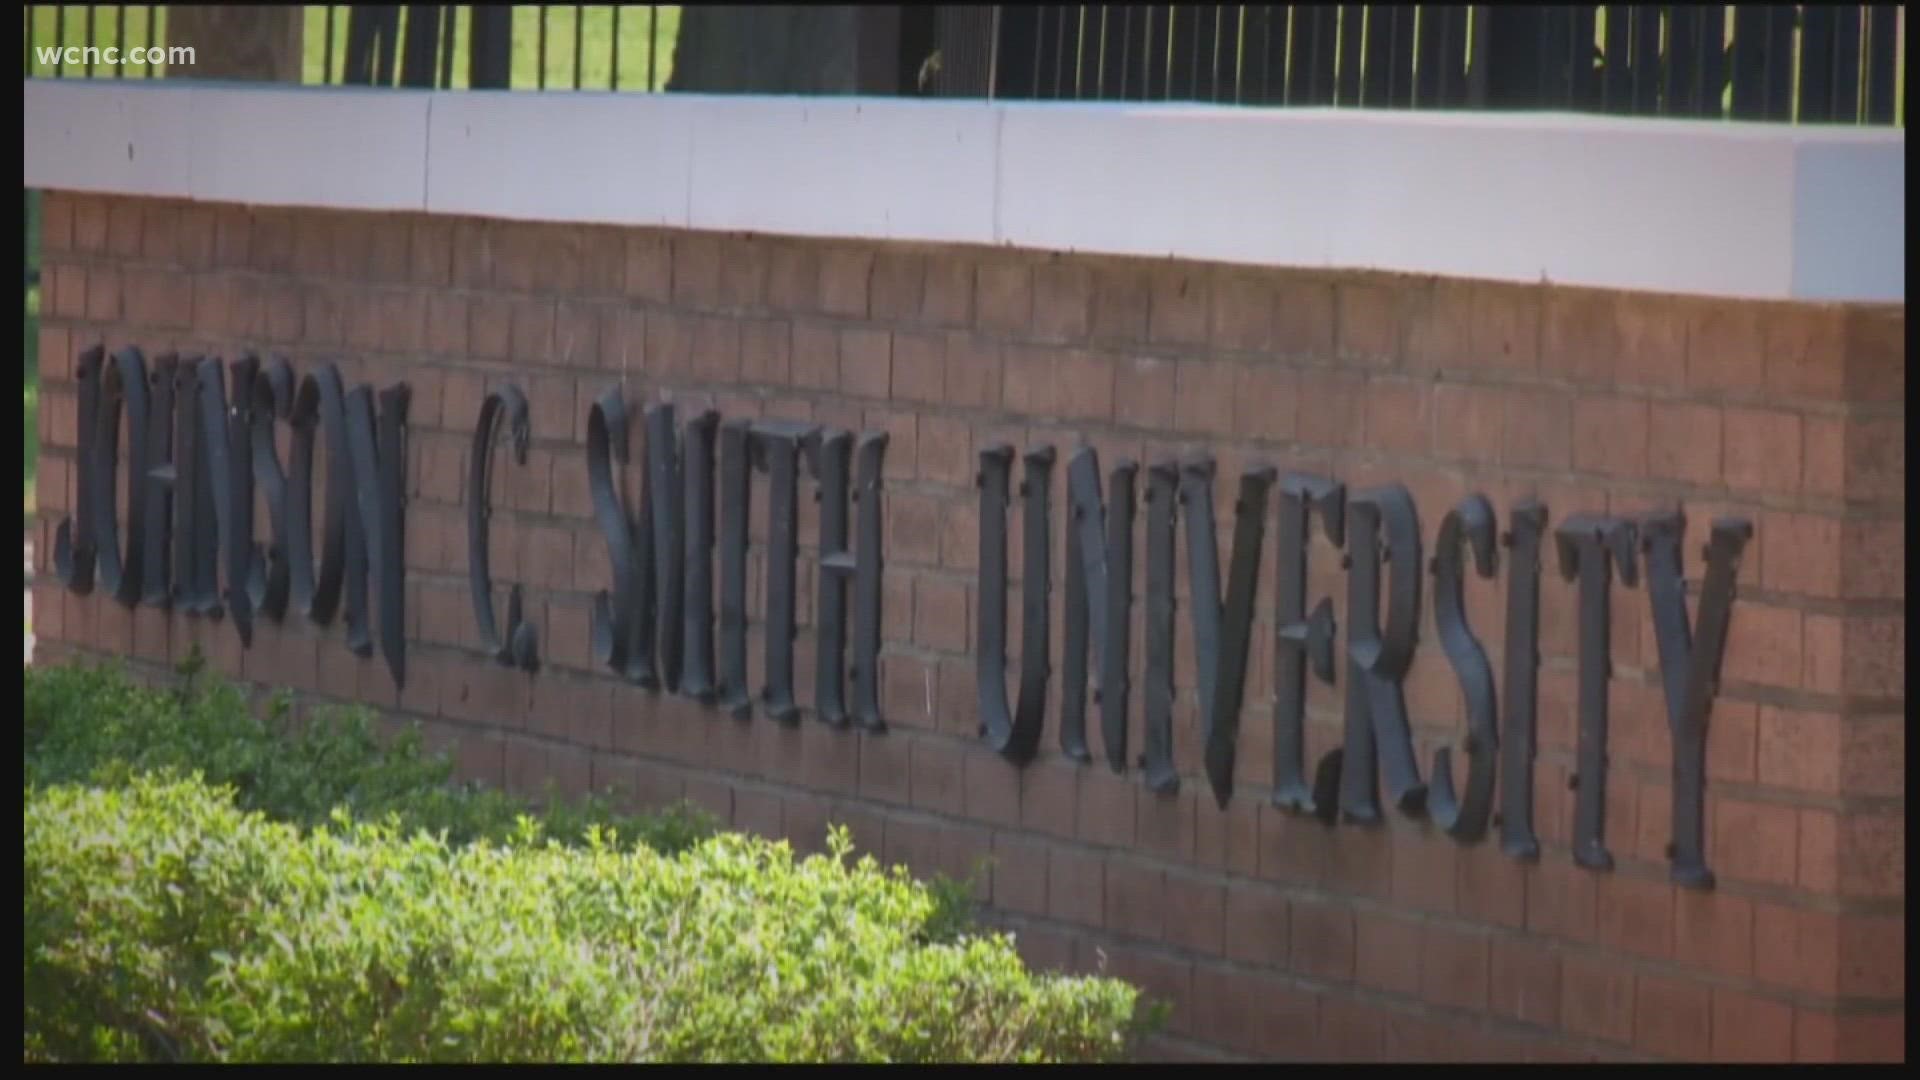 Chloe Leshner gets a look at what Johnson C. Smith University is doing, and the results.